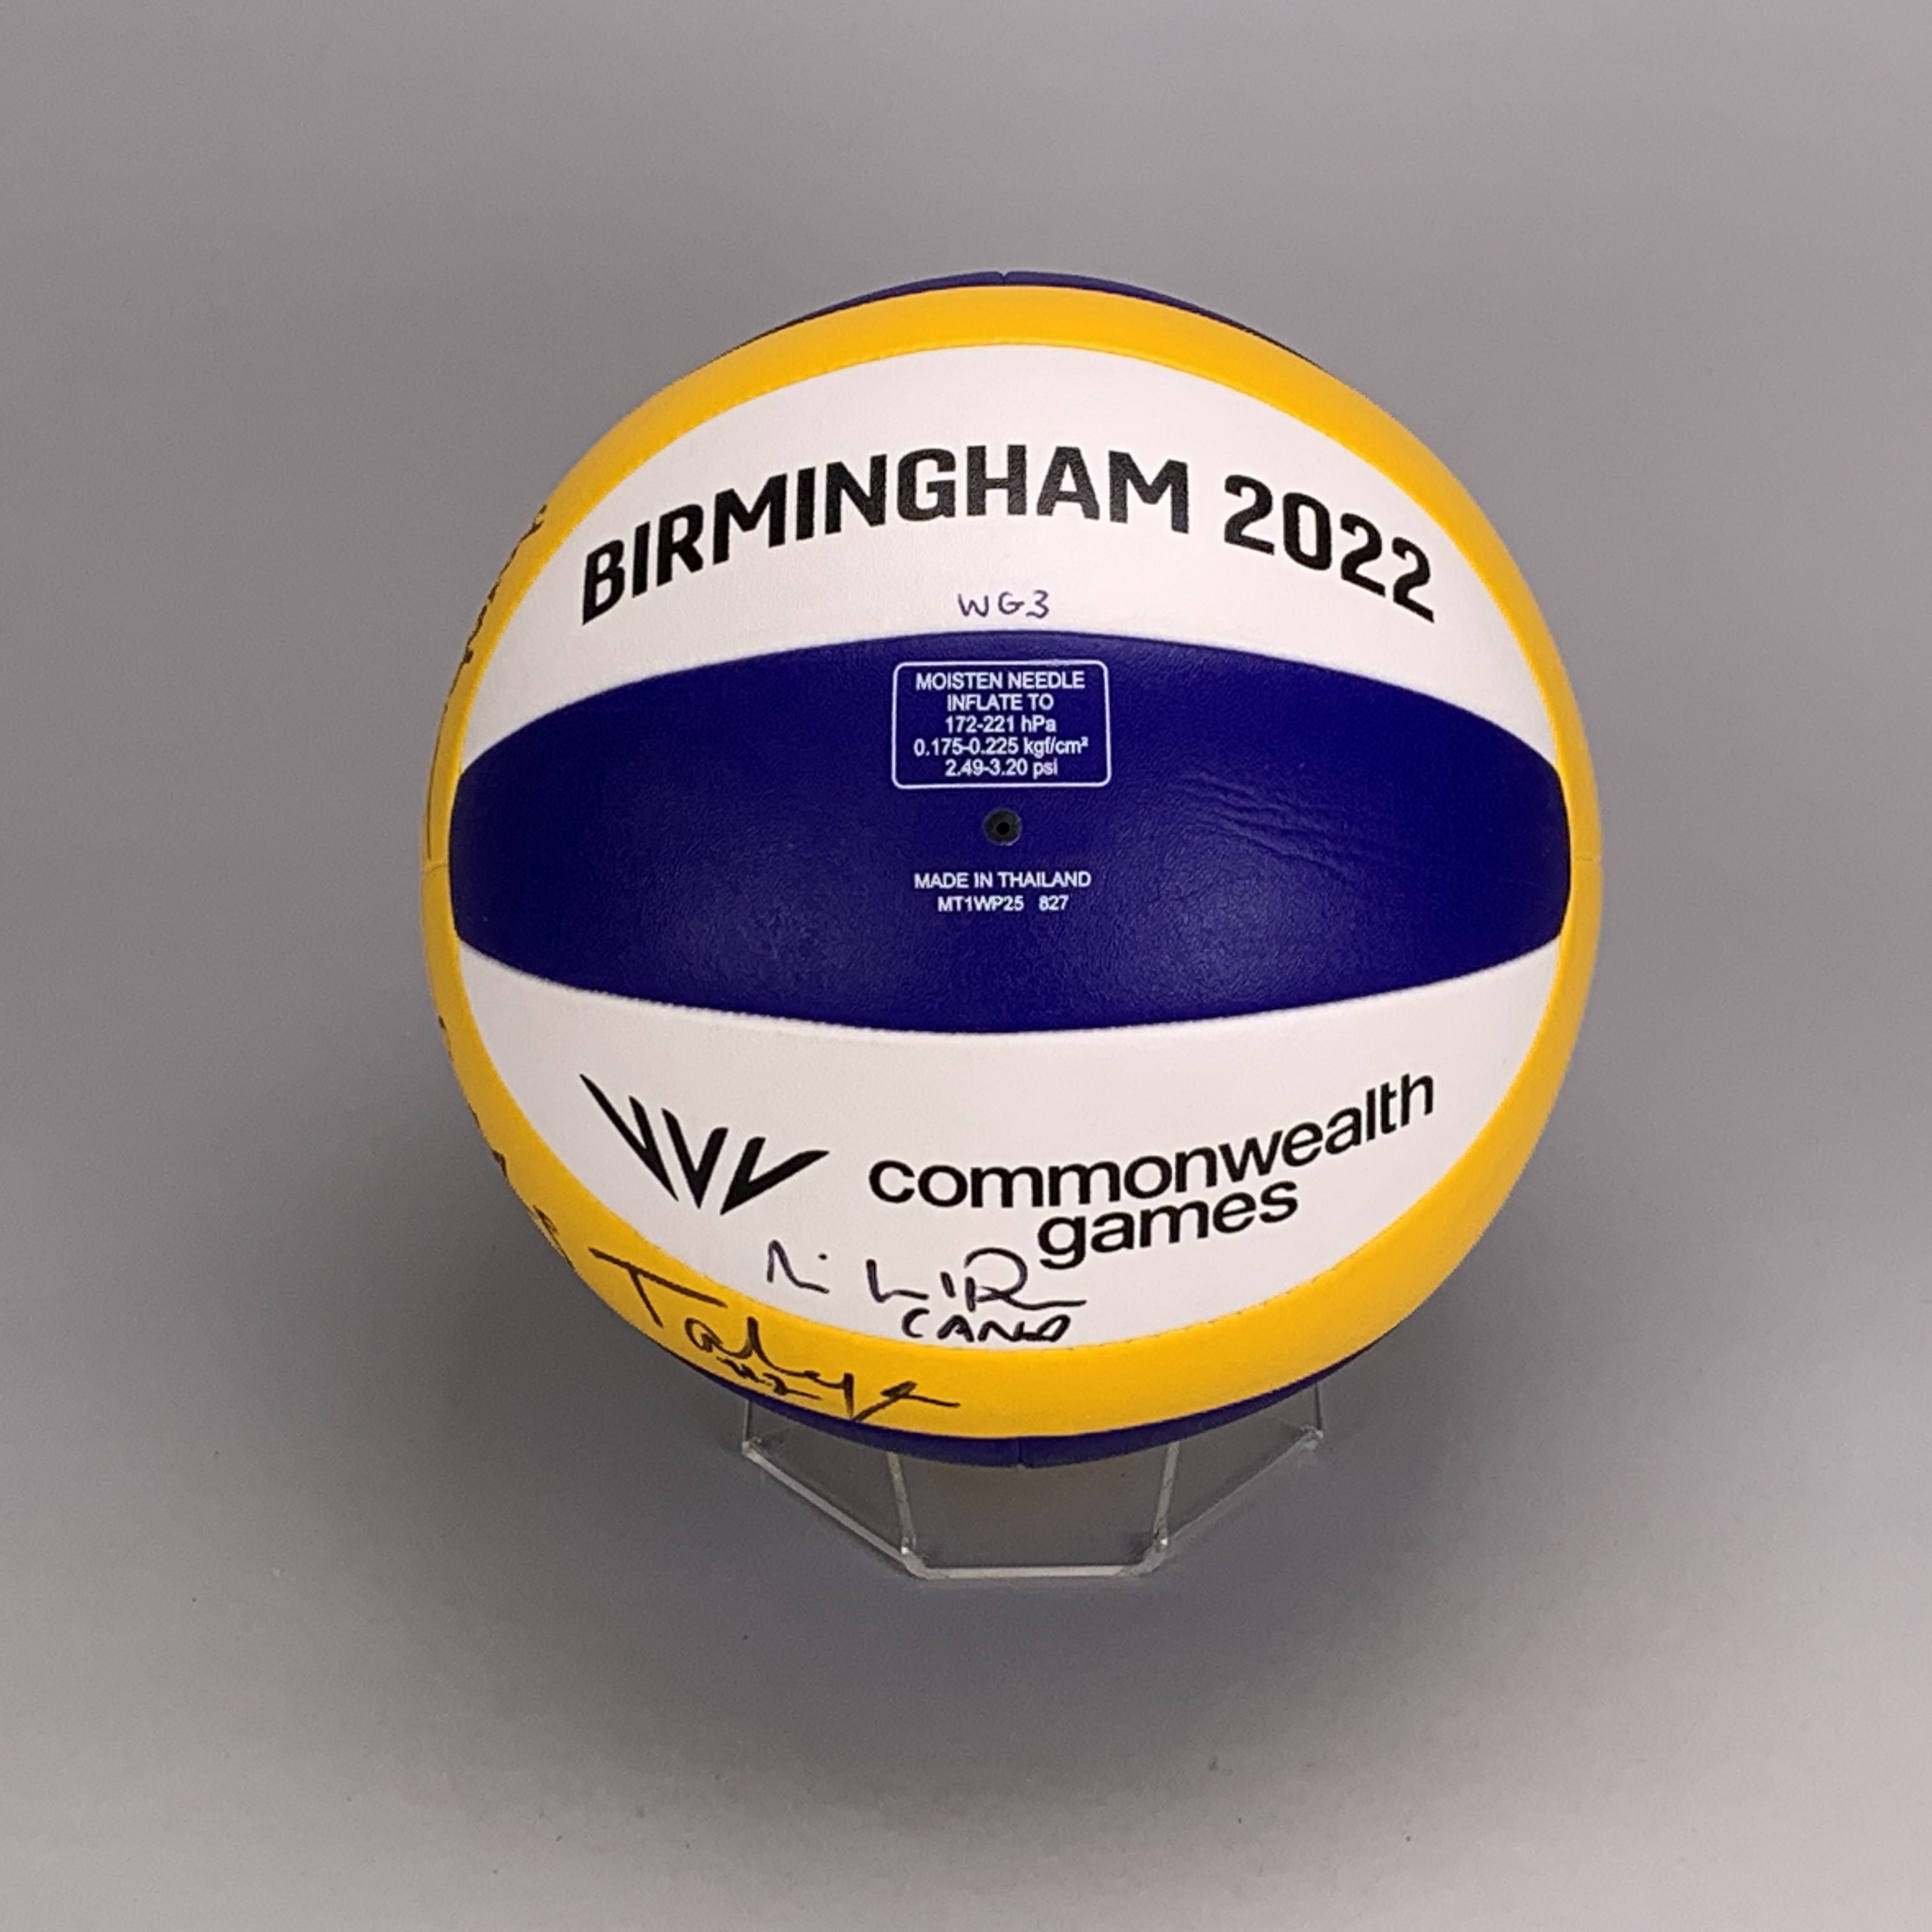 B2022 Women's Gold Medal Match Beach volleyball - Canada vs Australia. Signed by both teams